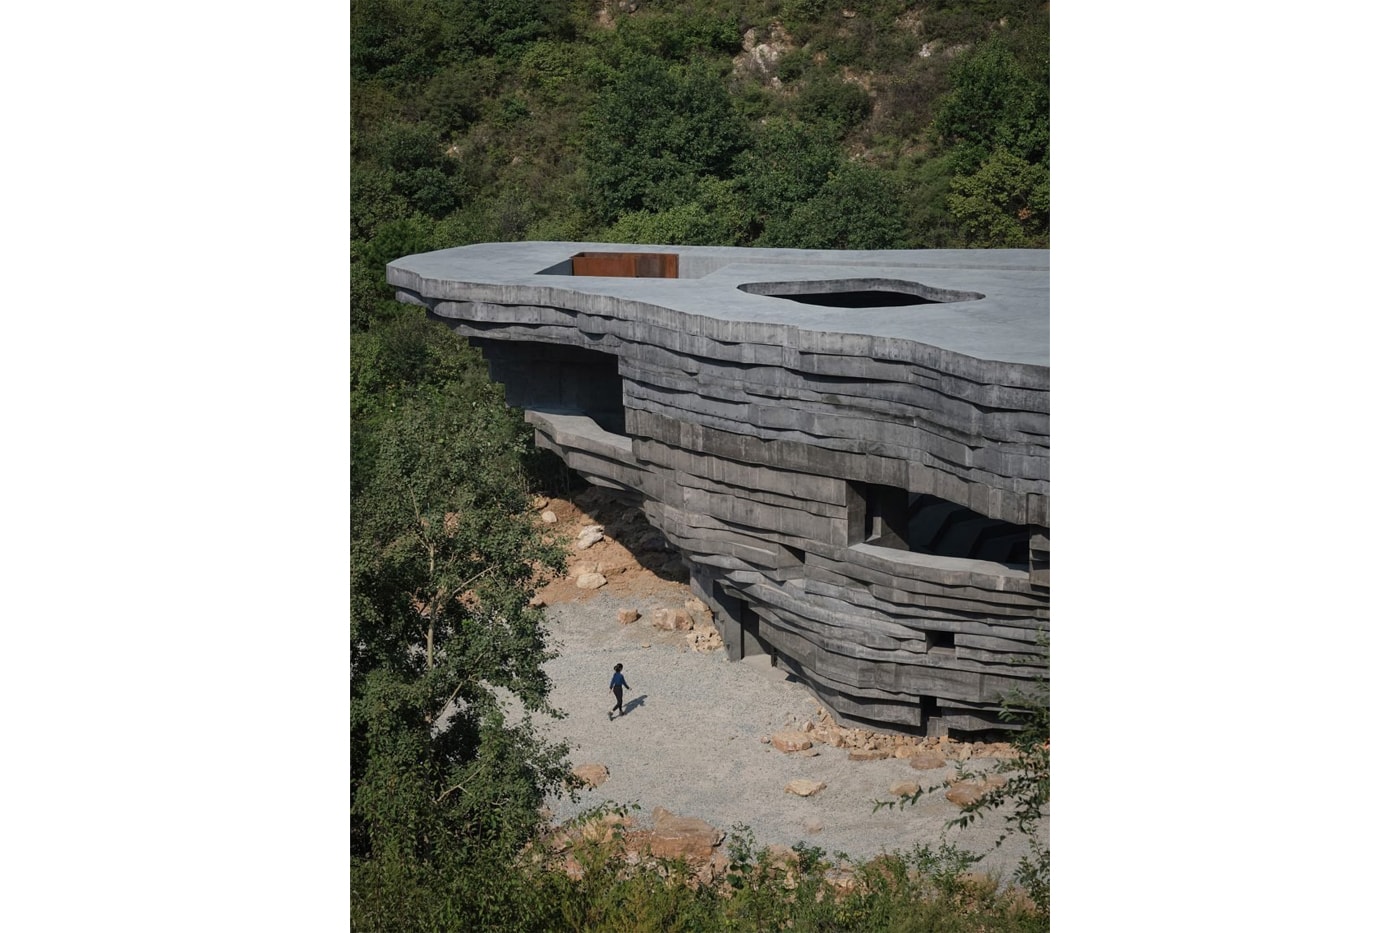 Open Architecture Completes "The Chapel of Sound" Rock-Like Concert Hall mountainous valley great wall of china concrete natural local stone reflection amphitheater stage beijing Li Hu Huang wenjiang news